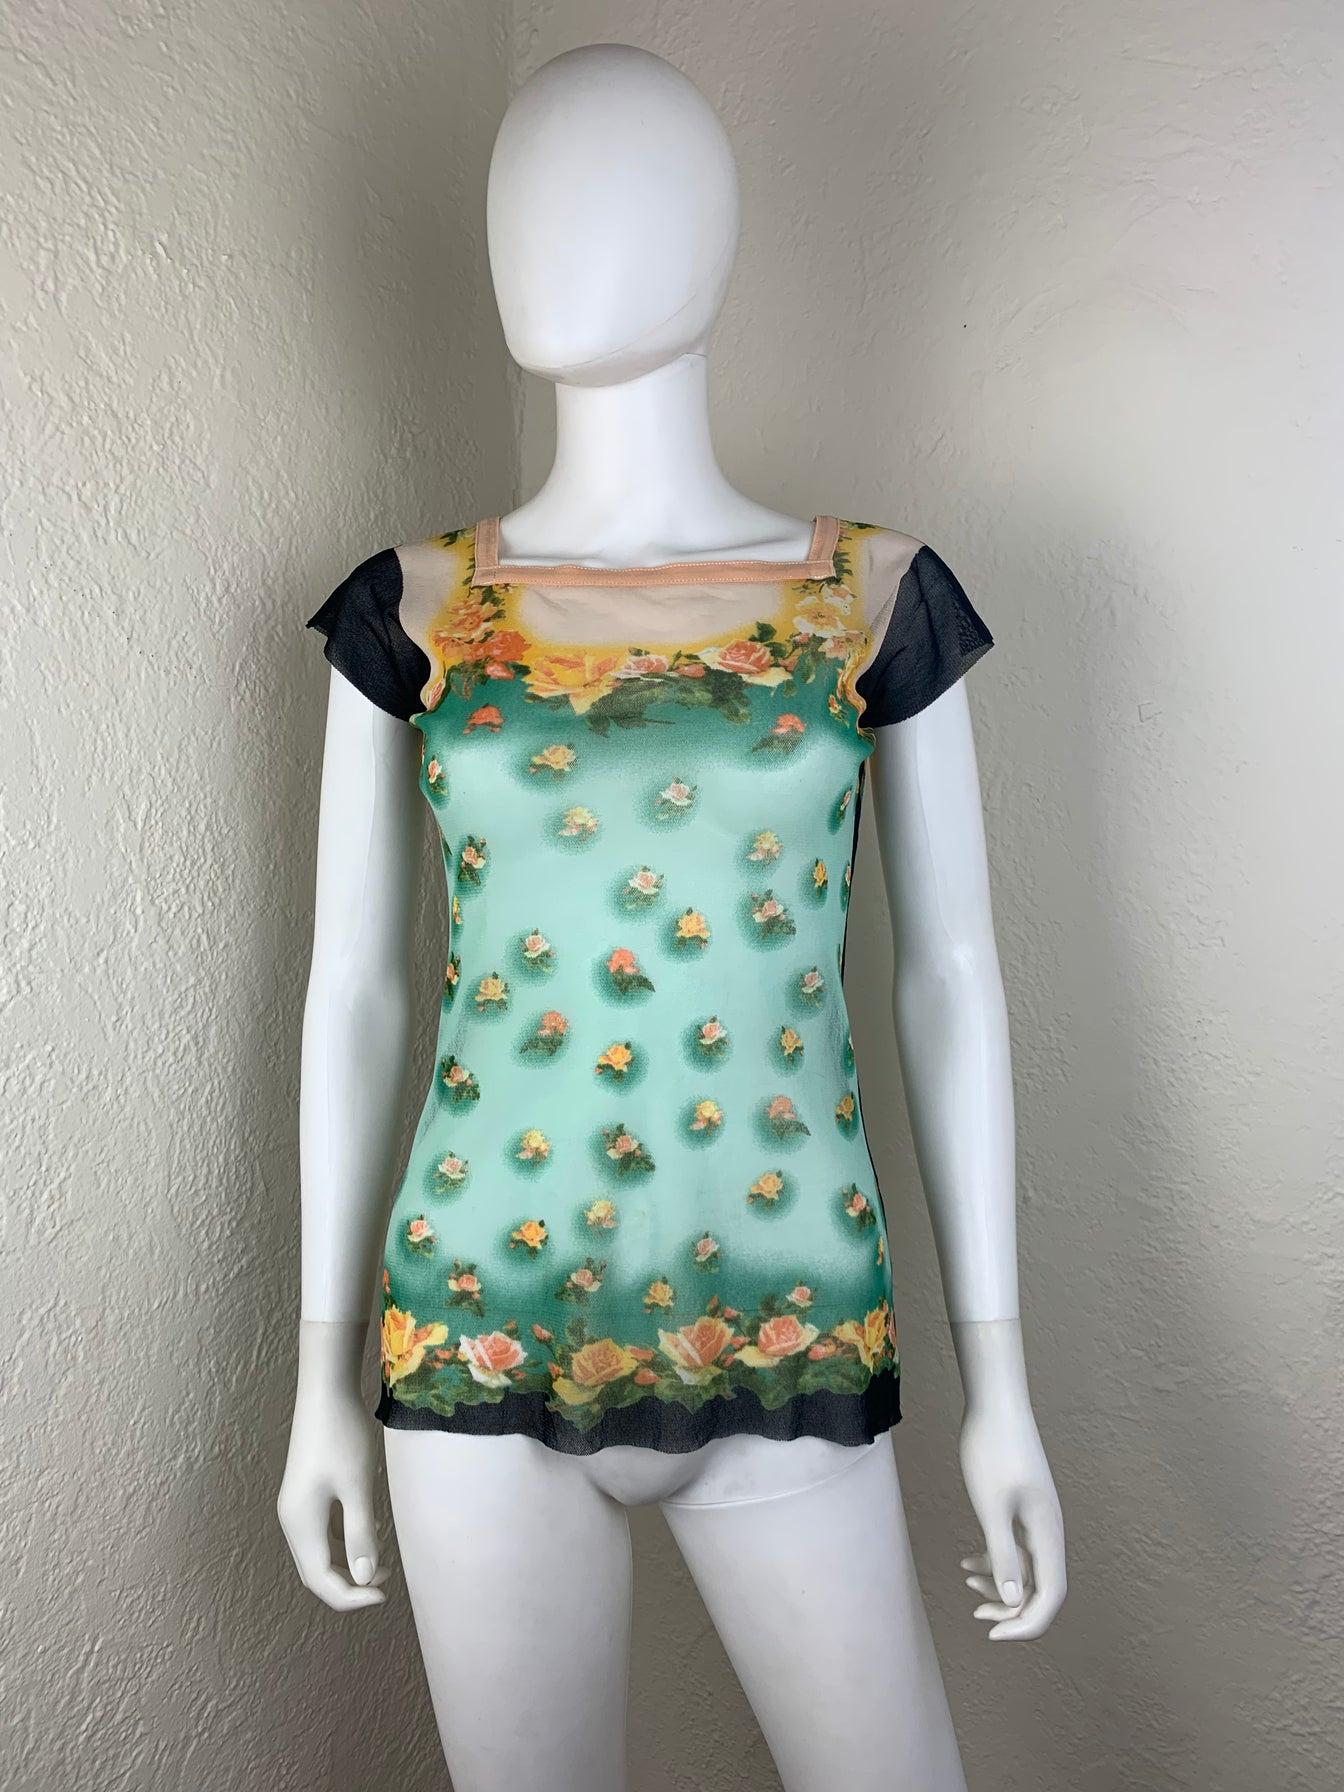 Jean-Paul Gaultier short sleeve floral rose print top from S/S 2001 collection. Print seen on Kendall Jenner in the summer of 2022.

- Guaranteed 100% Authentic.

- Perfect preowned condition.

- Description: Pink and yellow roses and green foliage